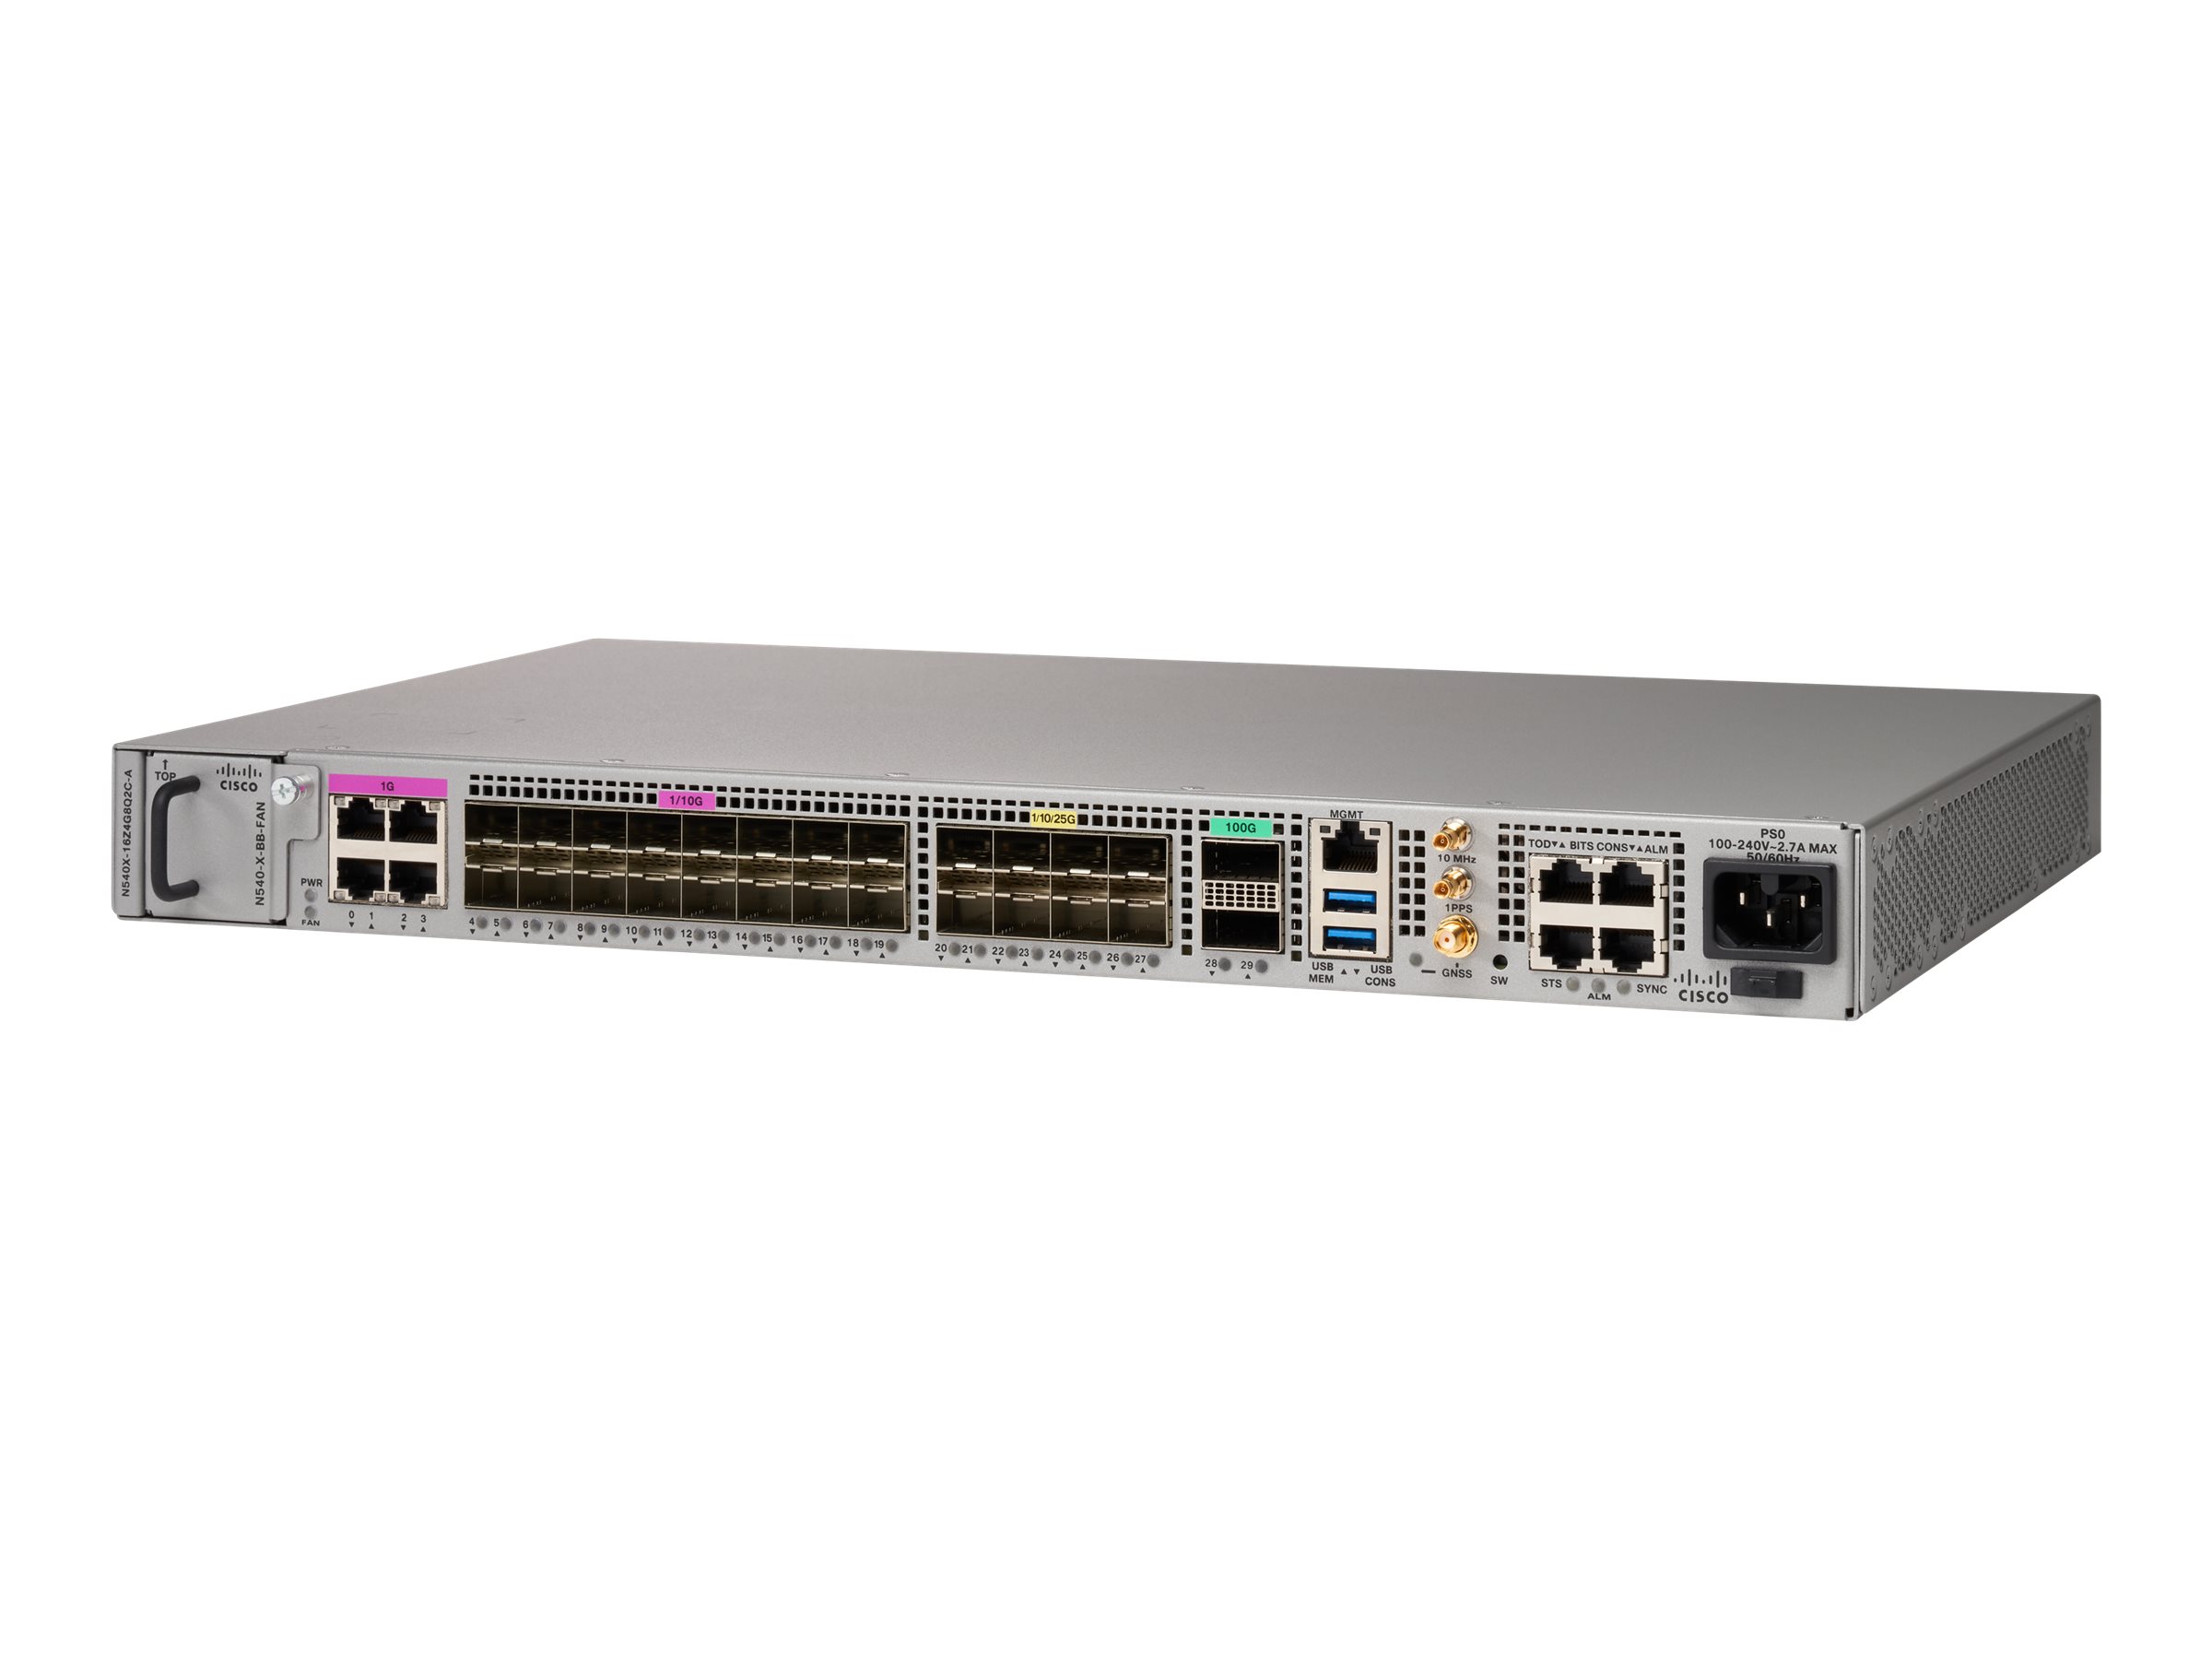 Cisco Network Convergence System 540 - Router - 40 Gigabit LAN, 100 Gigabit Ethernet, 25 Gigabit Ethernet - Seite-zu-Seite-Lufts